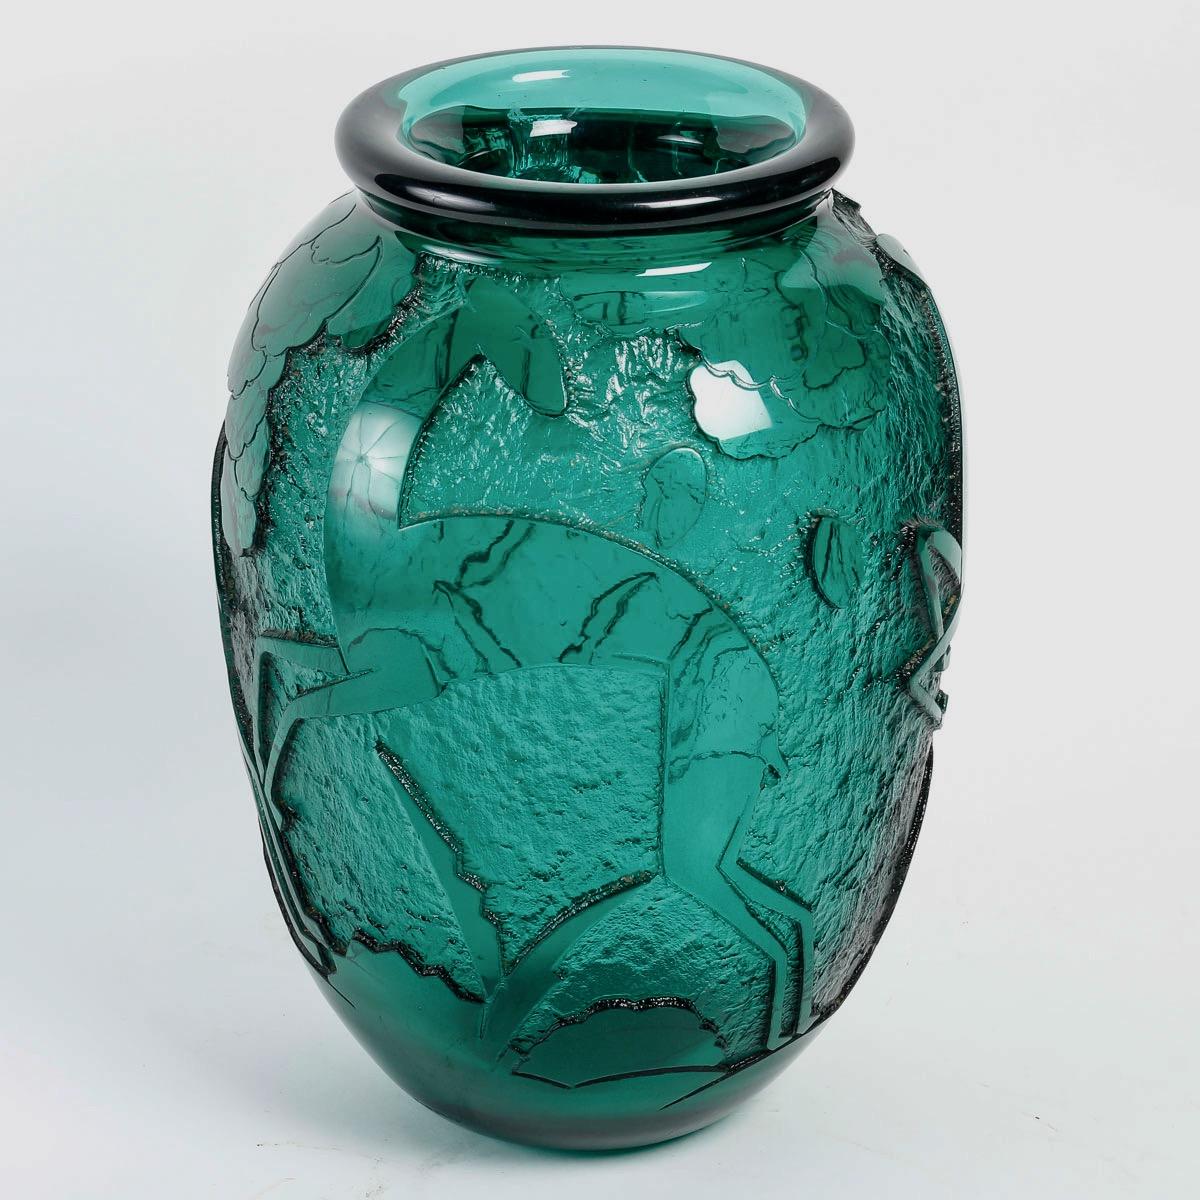 A Daum Nançy Art Deco acid-etched deep green glass vase, circa 1930

Rare and important vase «aux biches» in thick glass tinted green with decoration in relief with acid 
Signed «Daum Nancy France» 
Circa 1930

Daum is a crystal studio based in